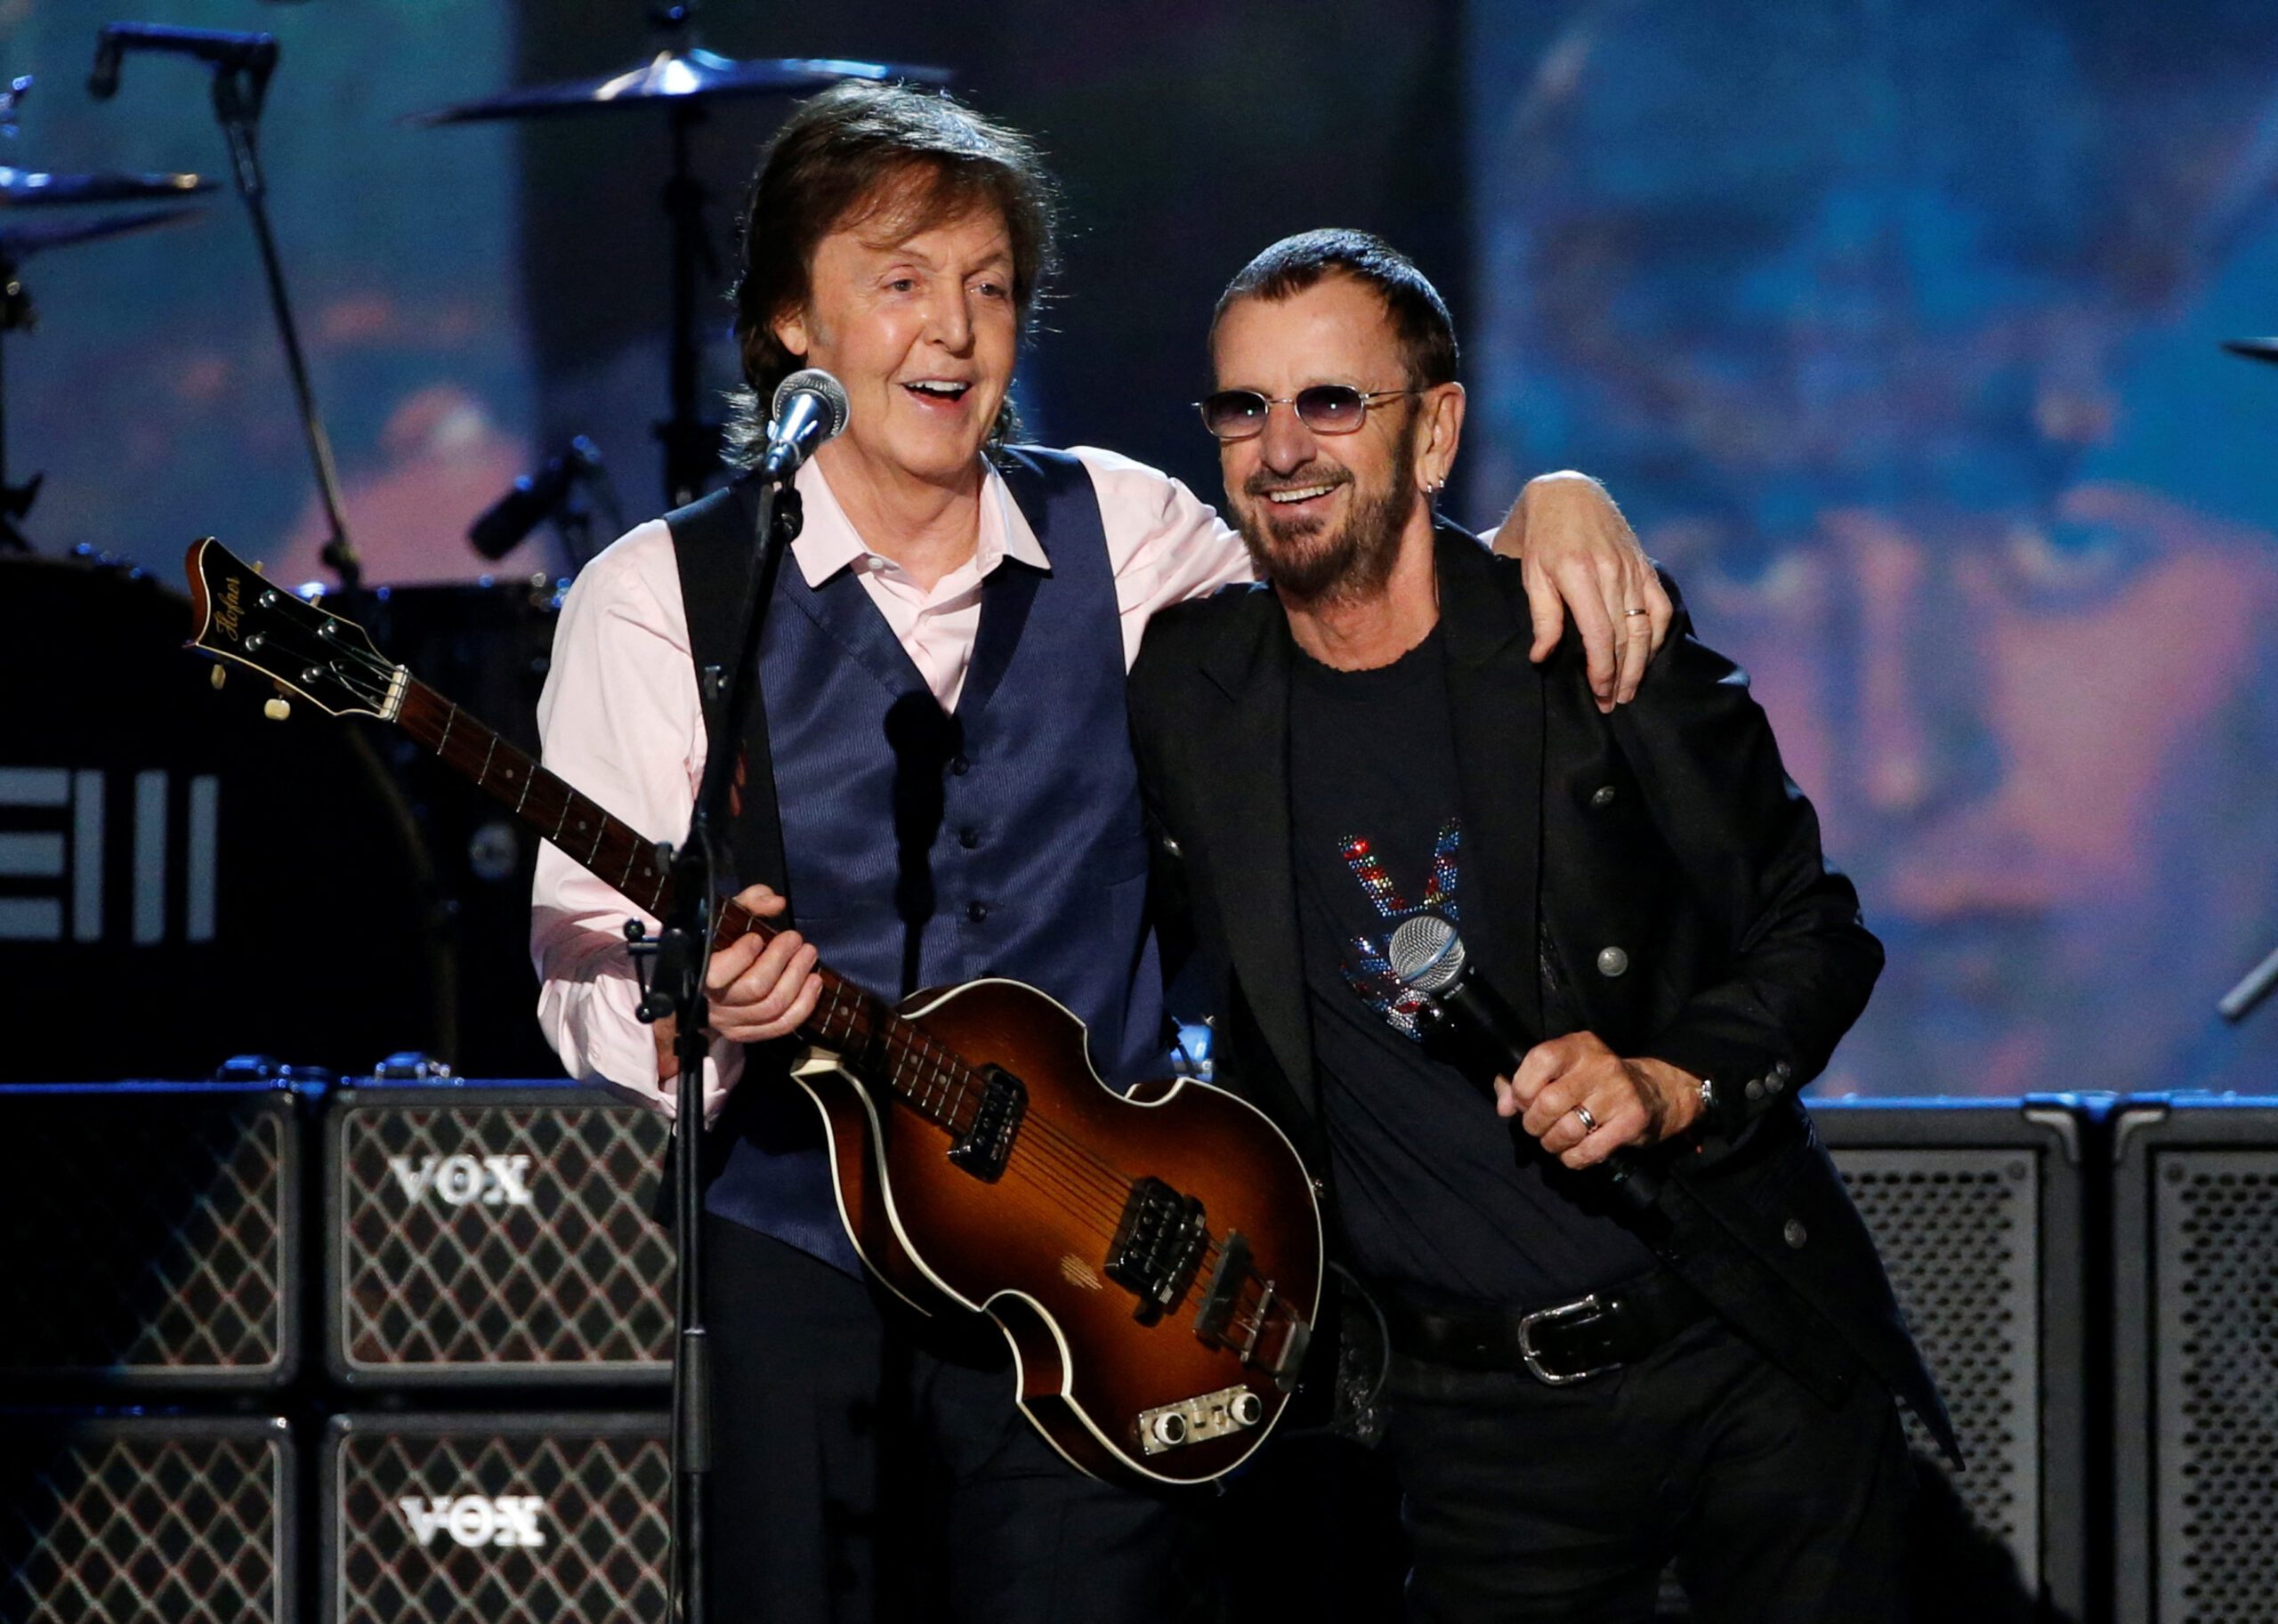 Now and Then': The Beatles to release new song with John Lennon's voice